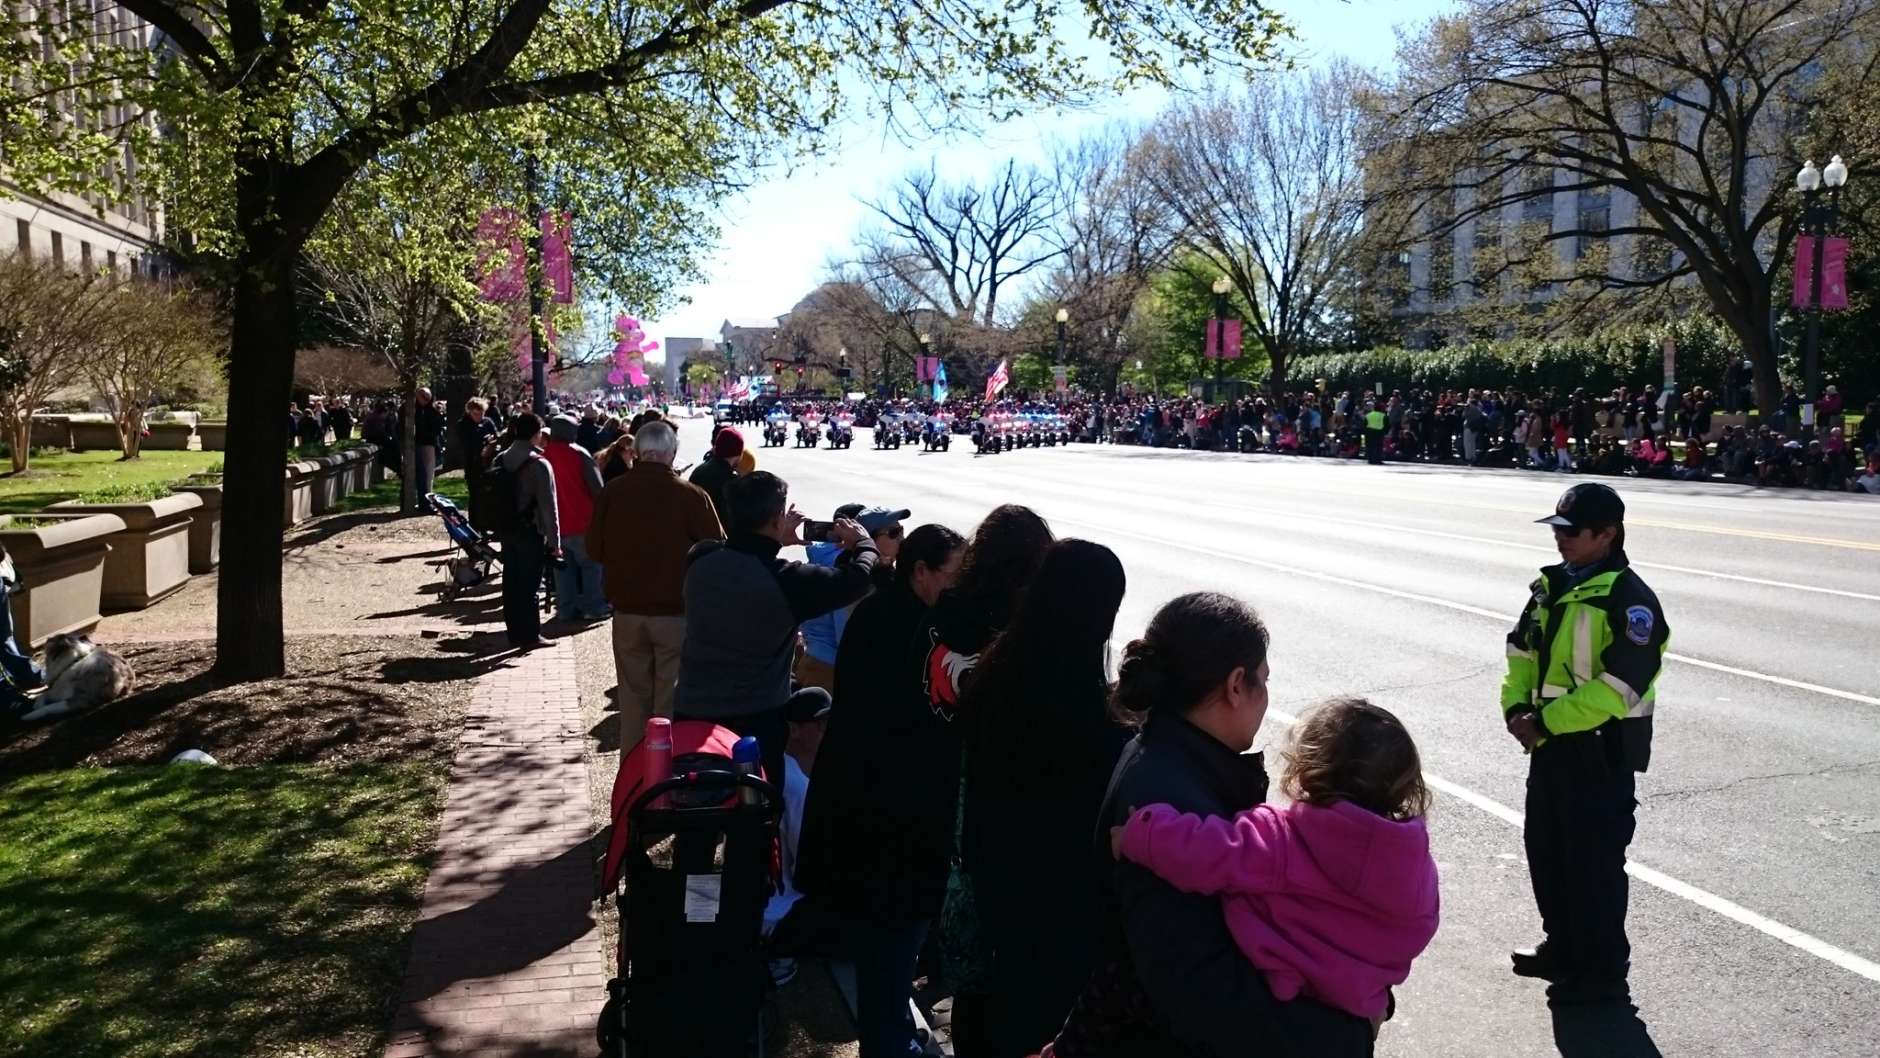 The 2017 National Cherry Blossom Parade kicked off on Saturday in D.C. (WTOP/Dennis Foley)